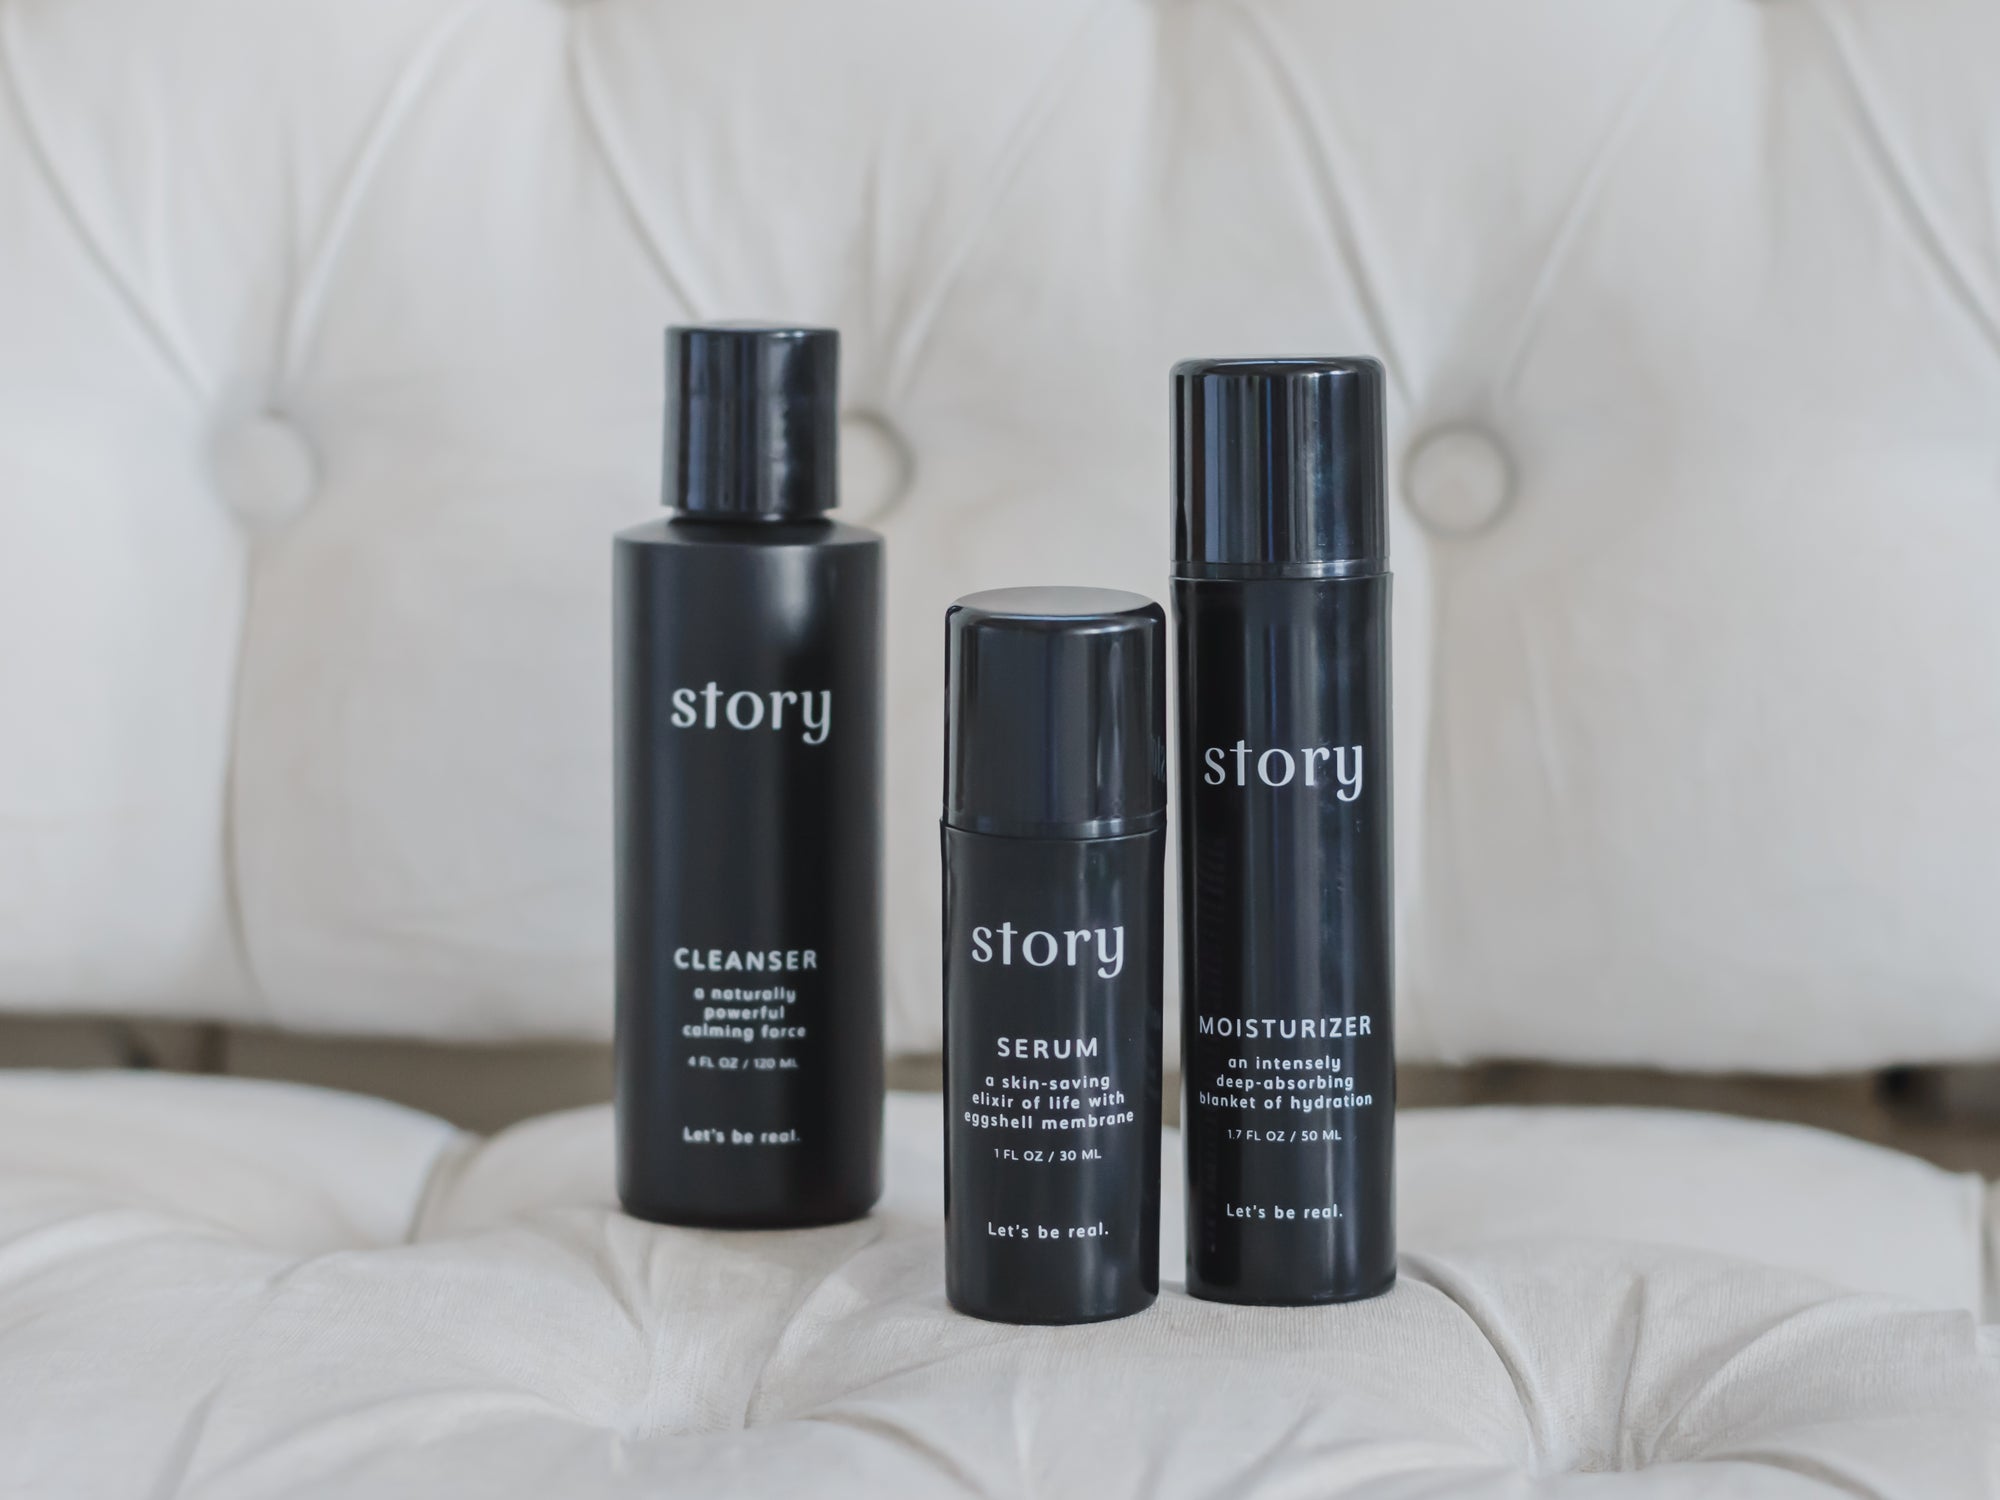 Story Skin Care products